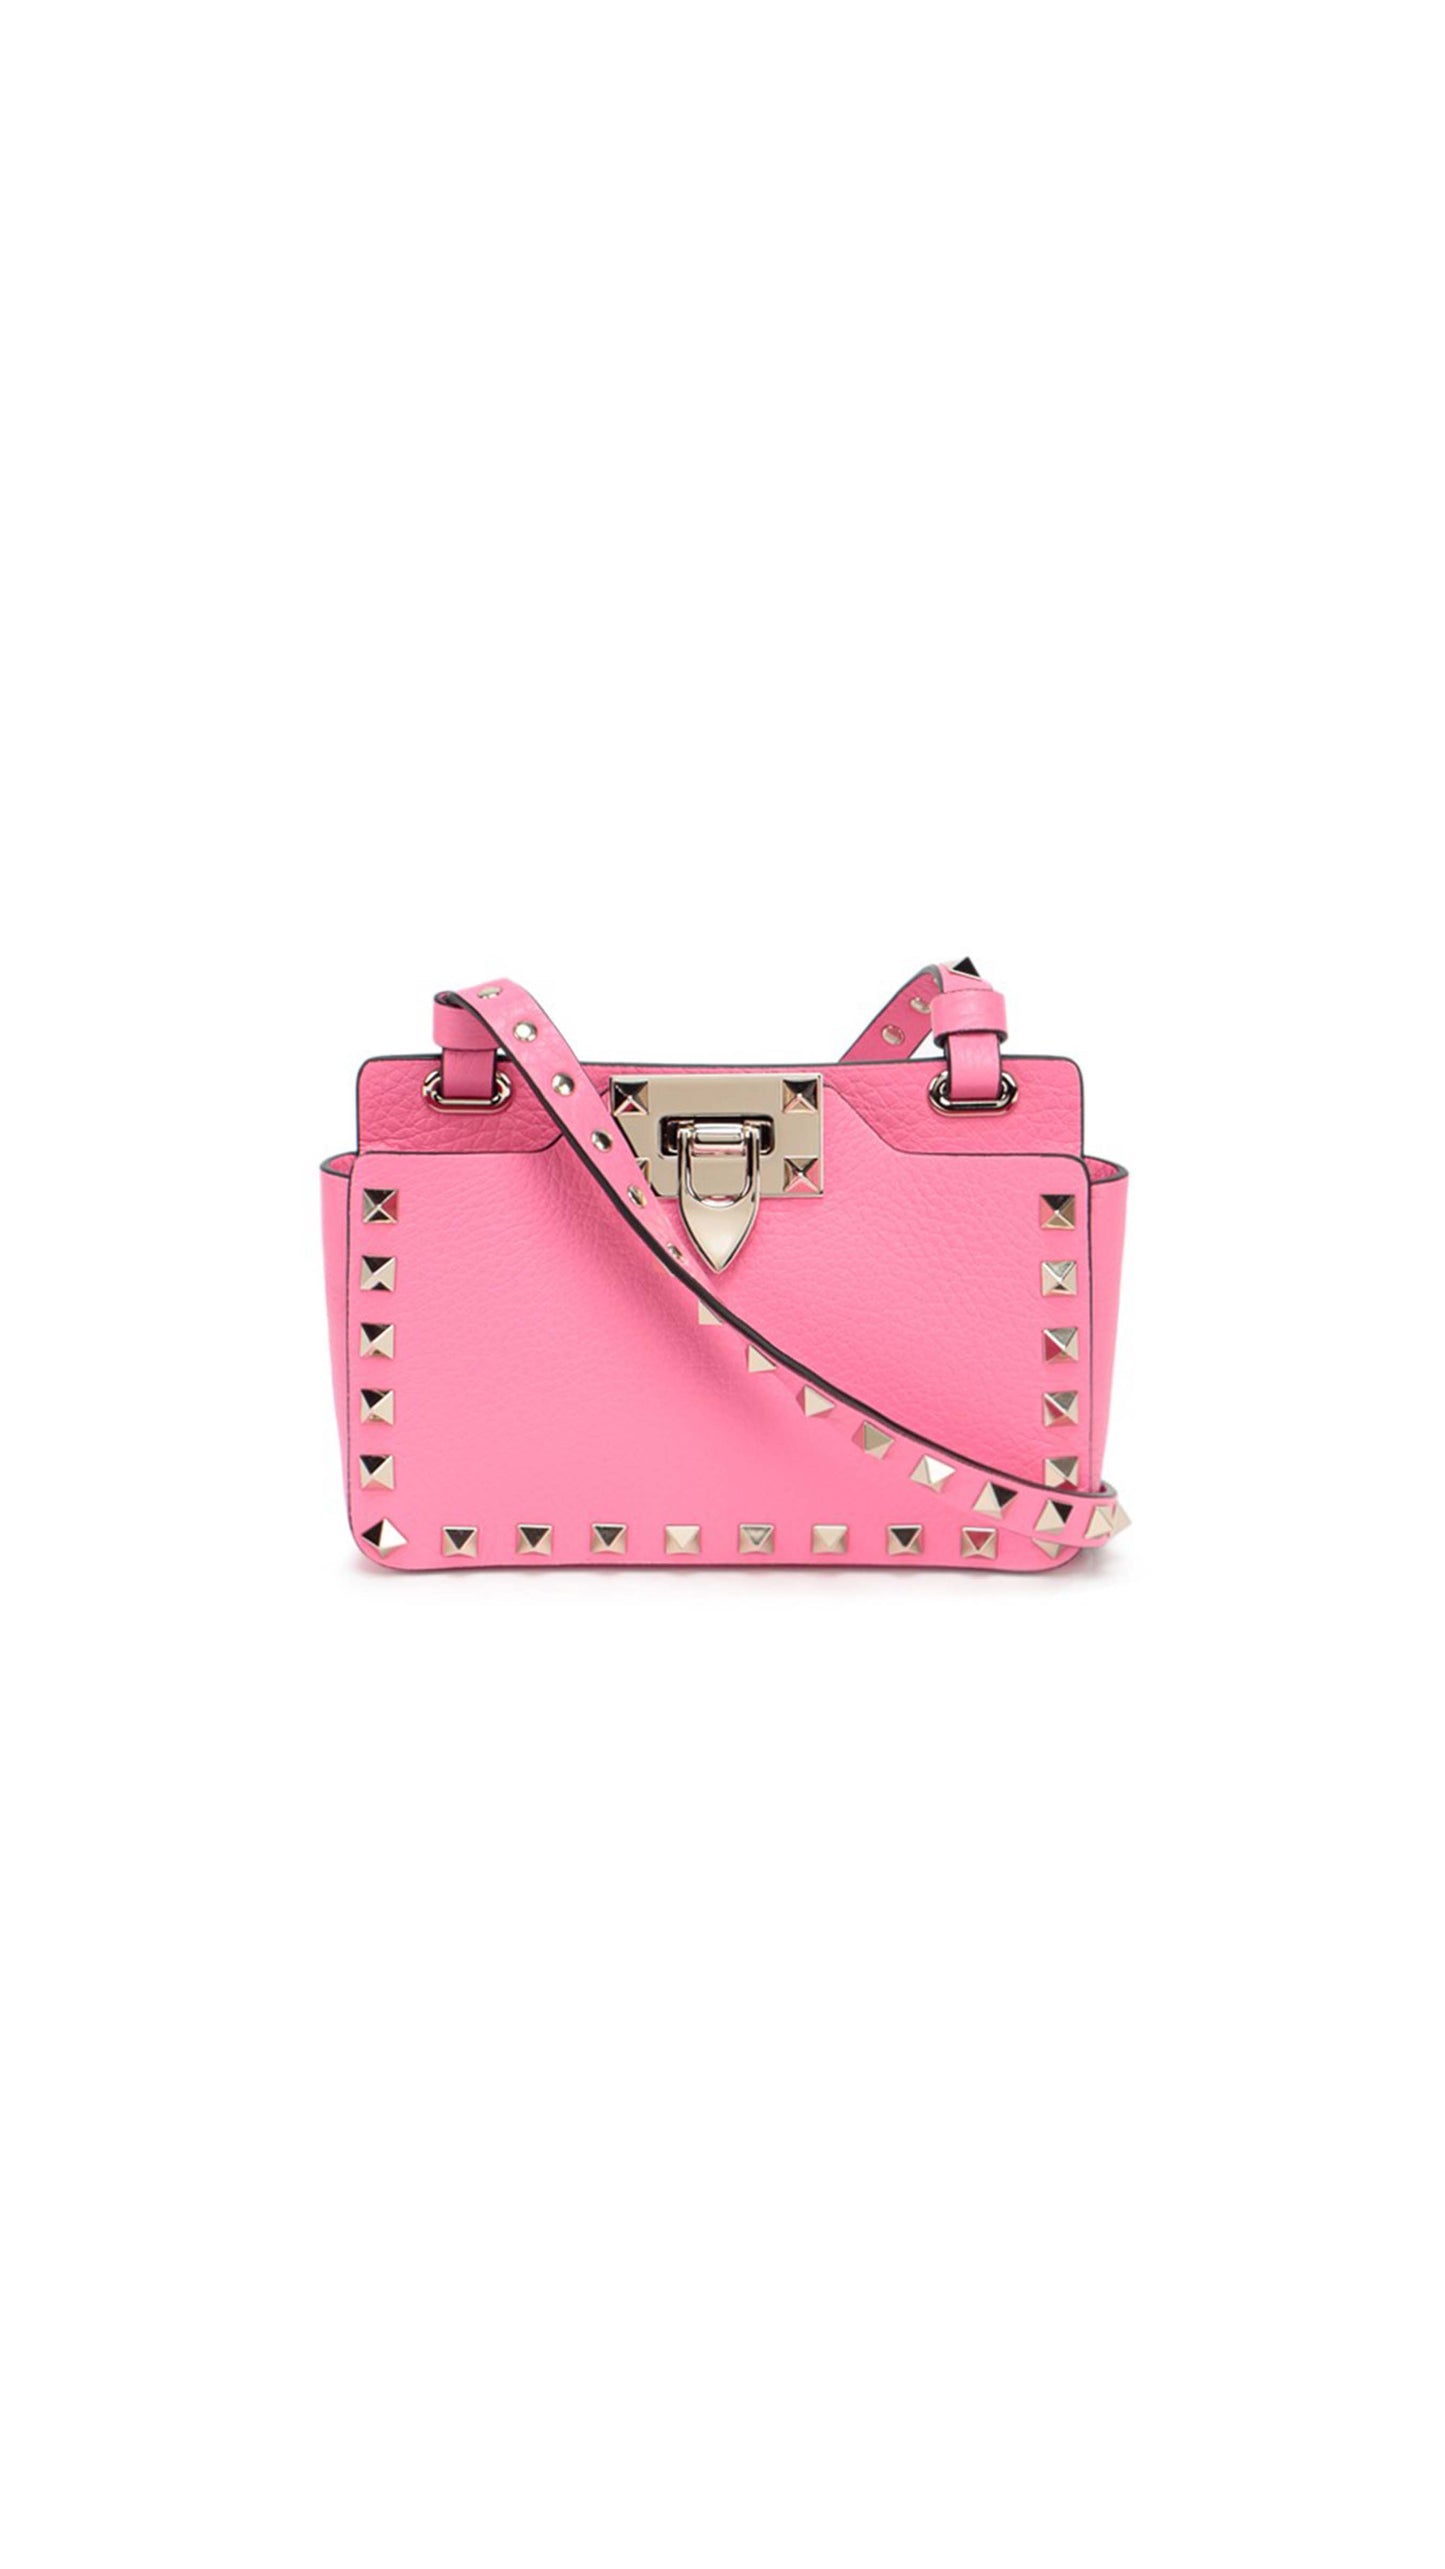 Rockstud Grainy Calfskin Wallet With Chain Strap - Pink